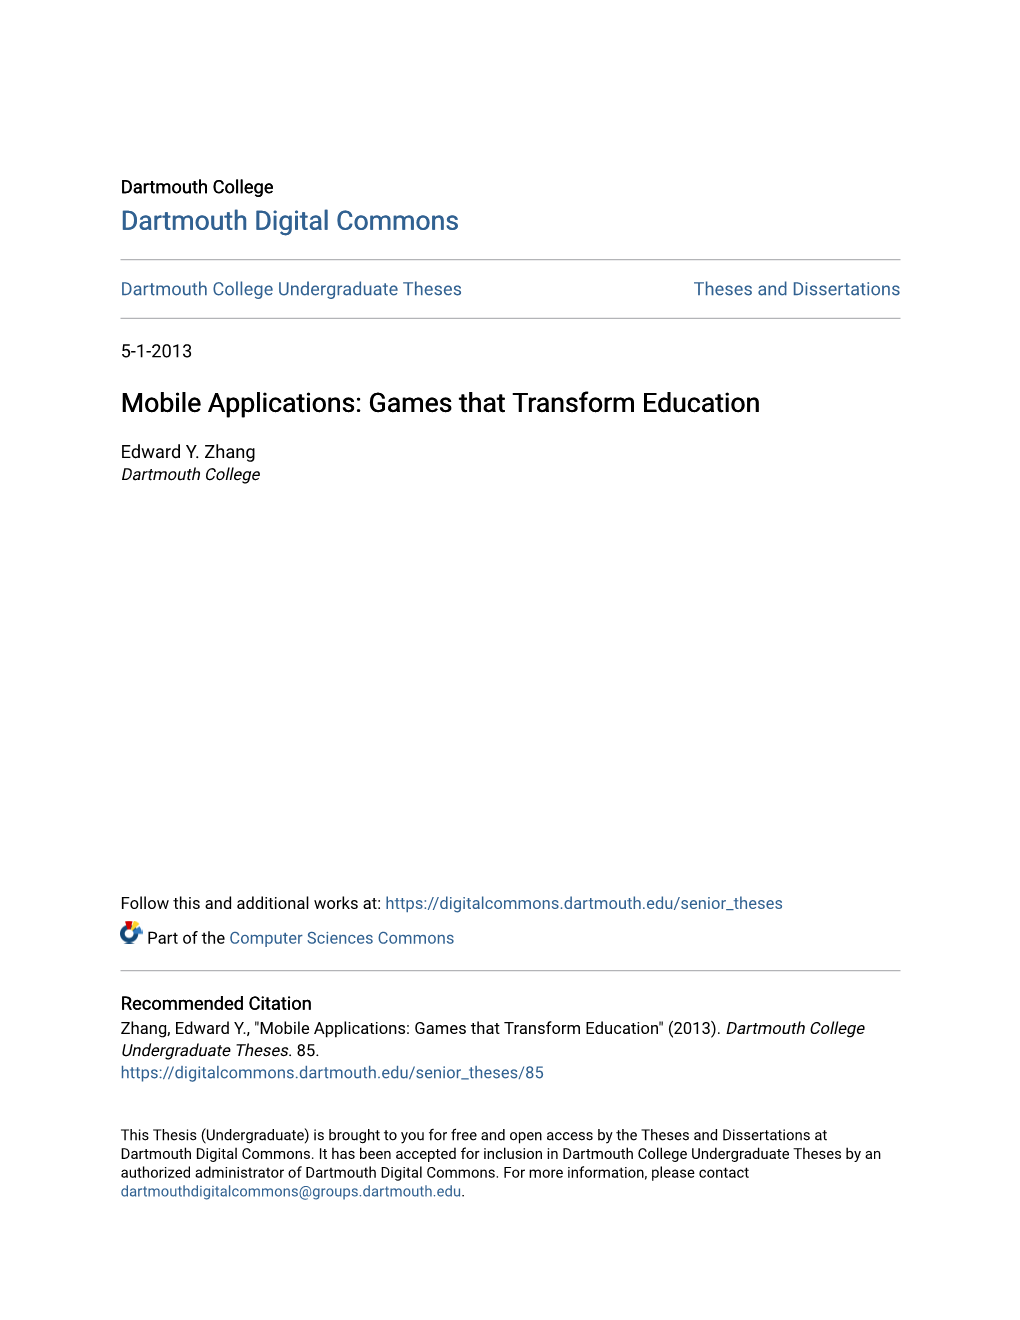 Mobile Applications: Games That Transform Education